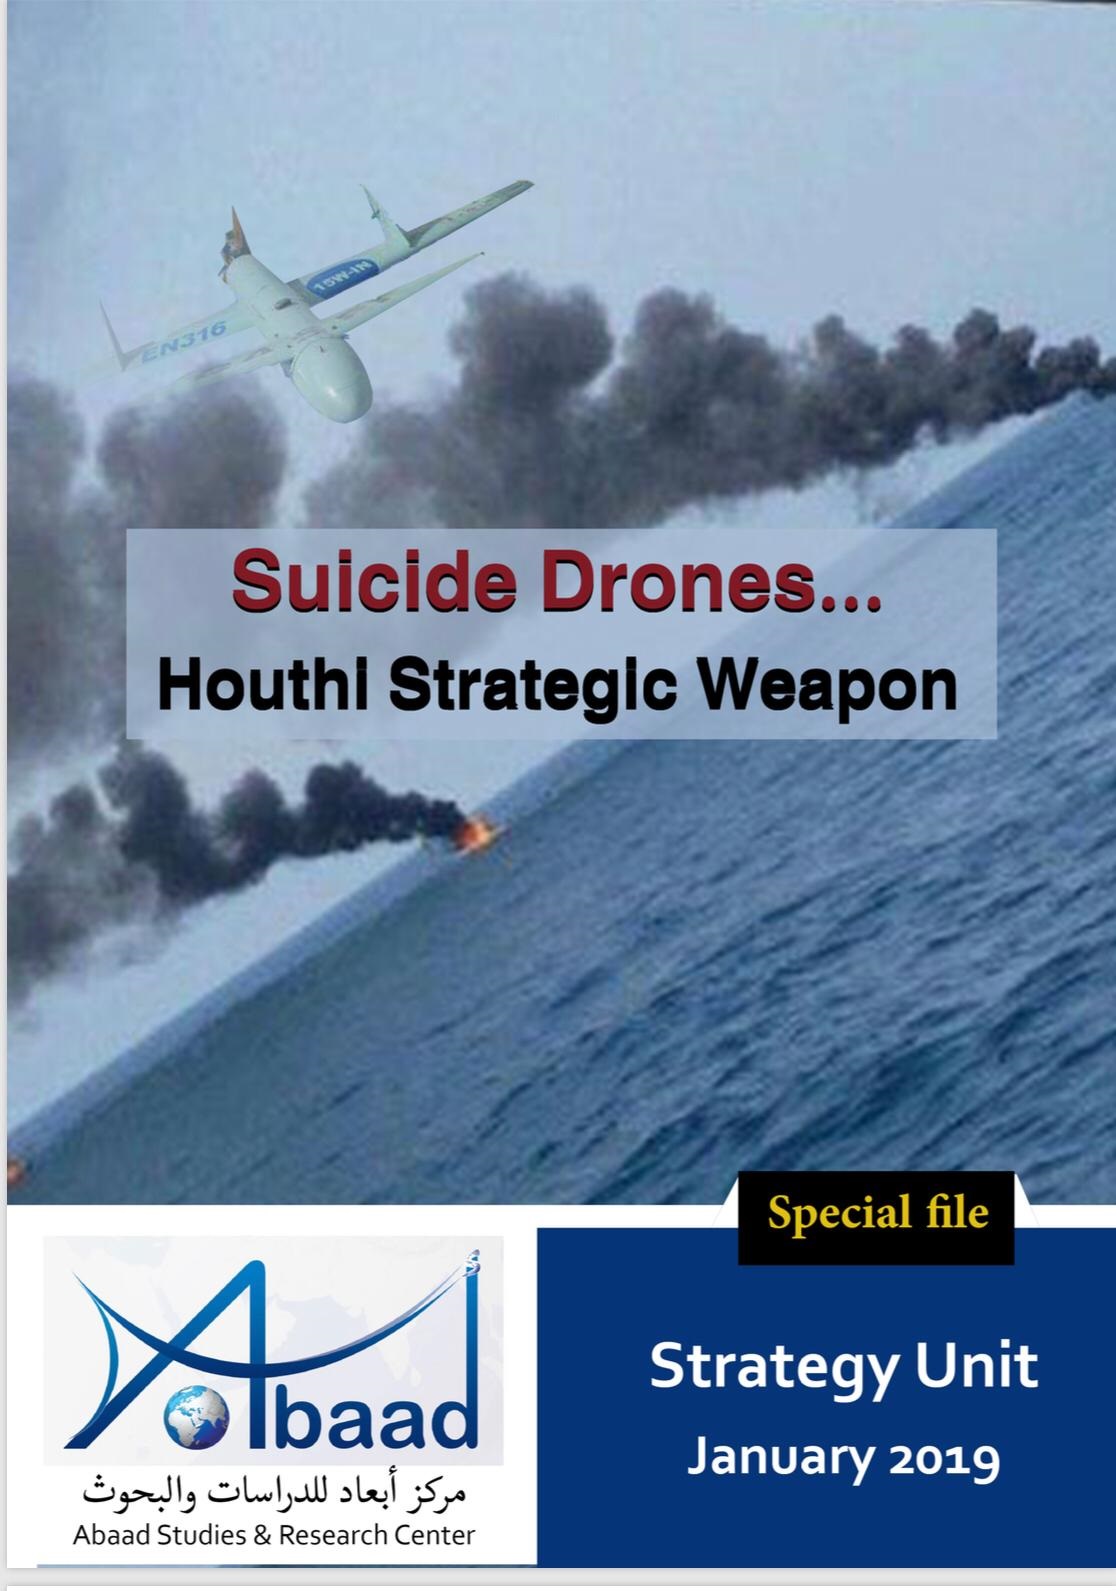  Suicide Drones... Houthi Strategic Weapon